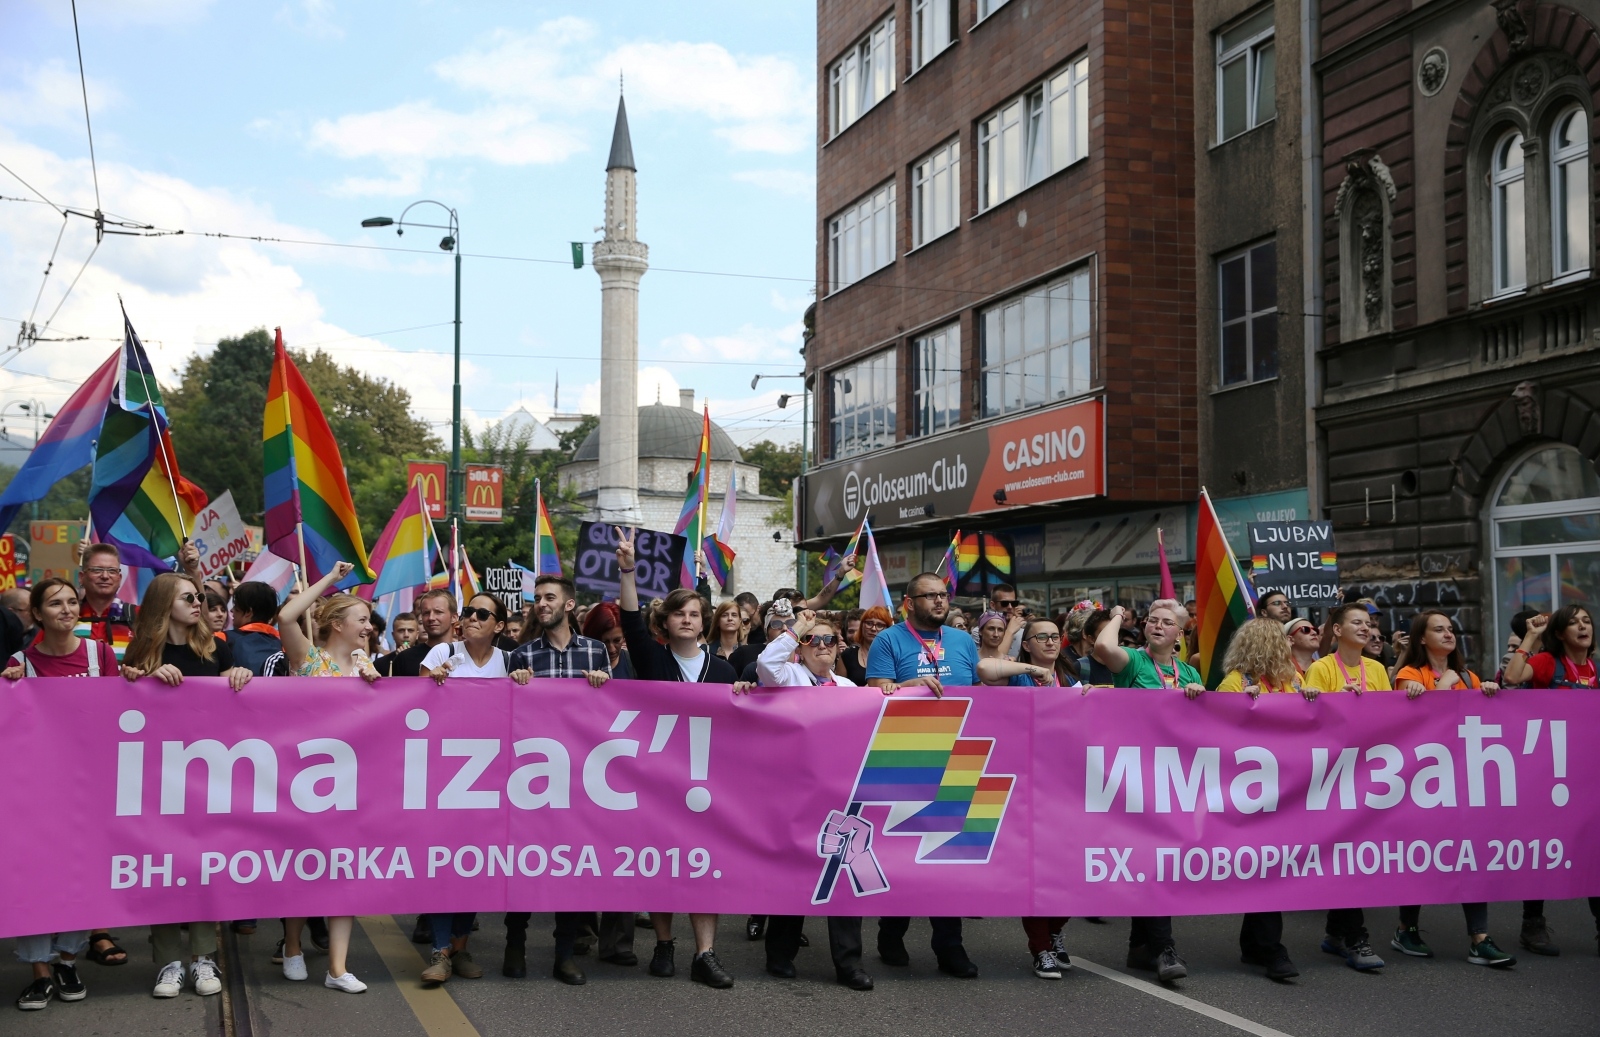 Sarajevo hosts its first Gay Pride march amidst security concerns Participants hold a banner during the first gay pride parade in Sarajevo, Bosnia and Herzegovina September 8, 2019. The banner reads "Let us out".  REUTERS/Dado Ruvic DADO RUVIC